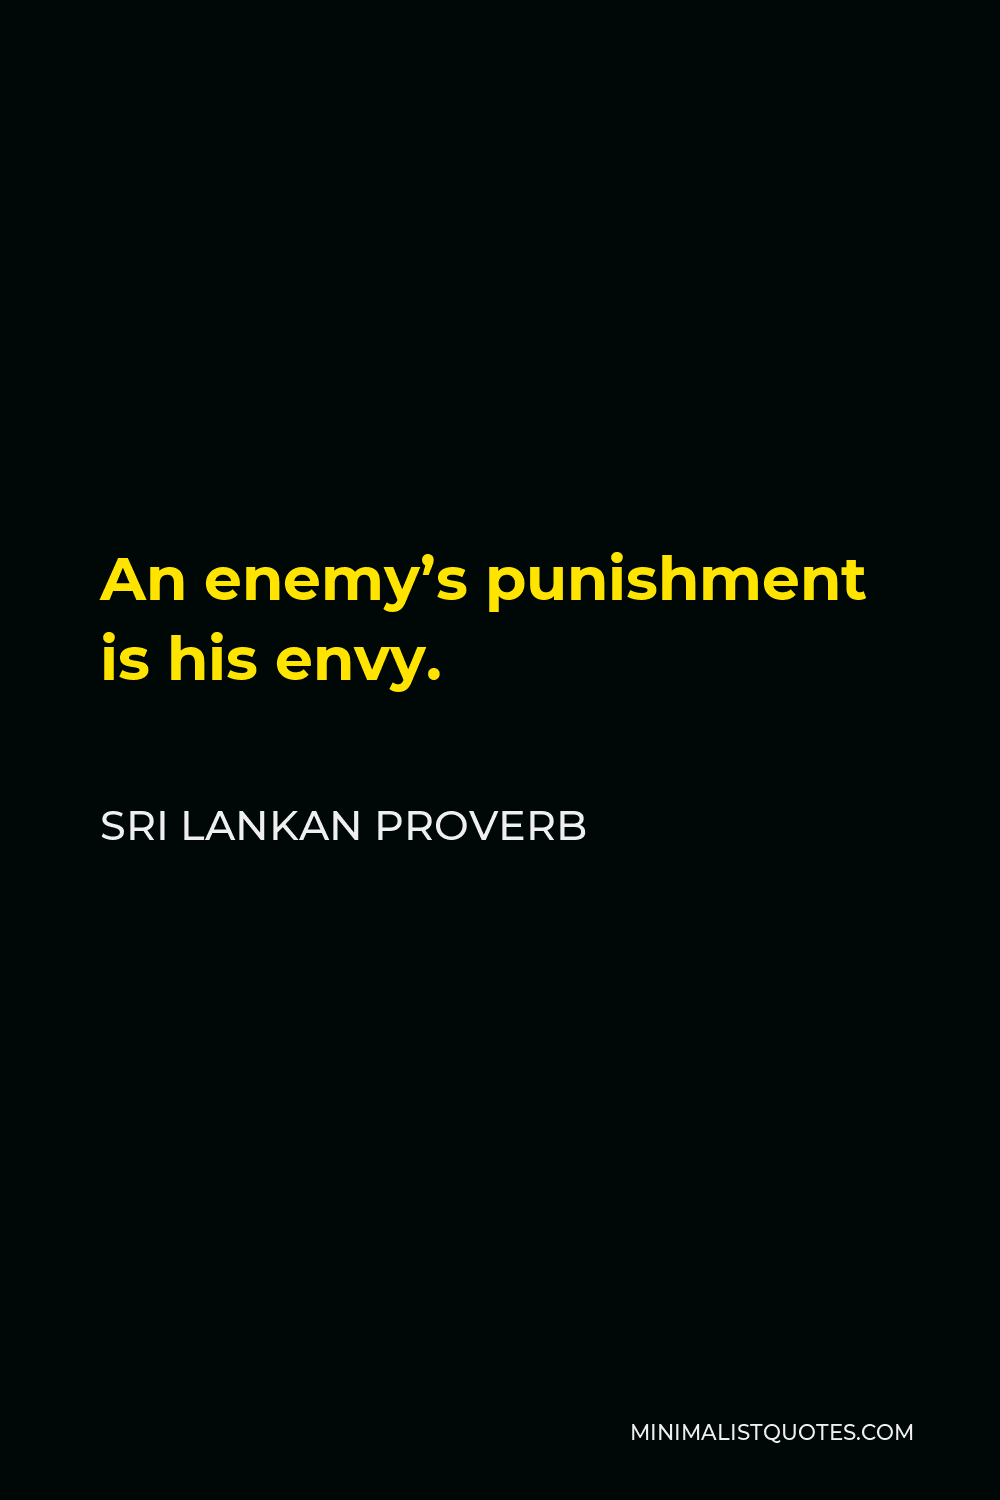 Sri Lankan Proverb Quote - An enemy’s punishment is his envy.